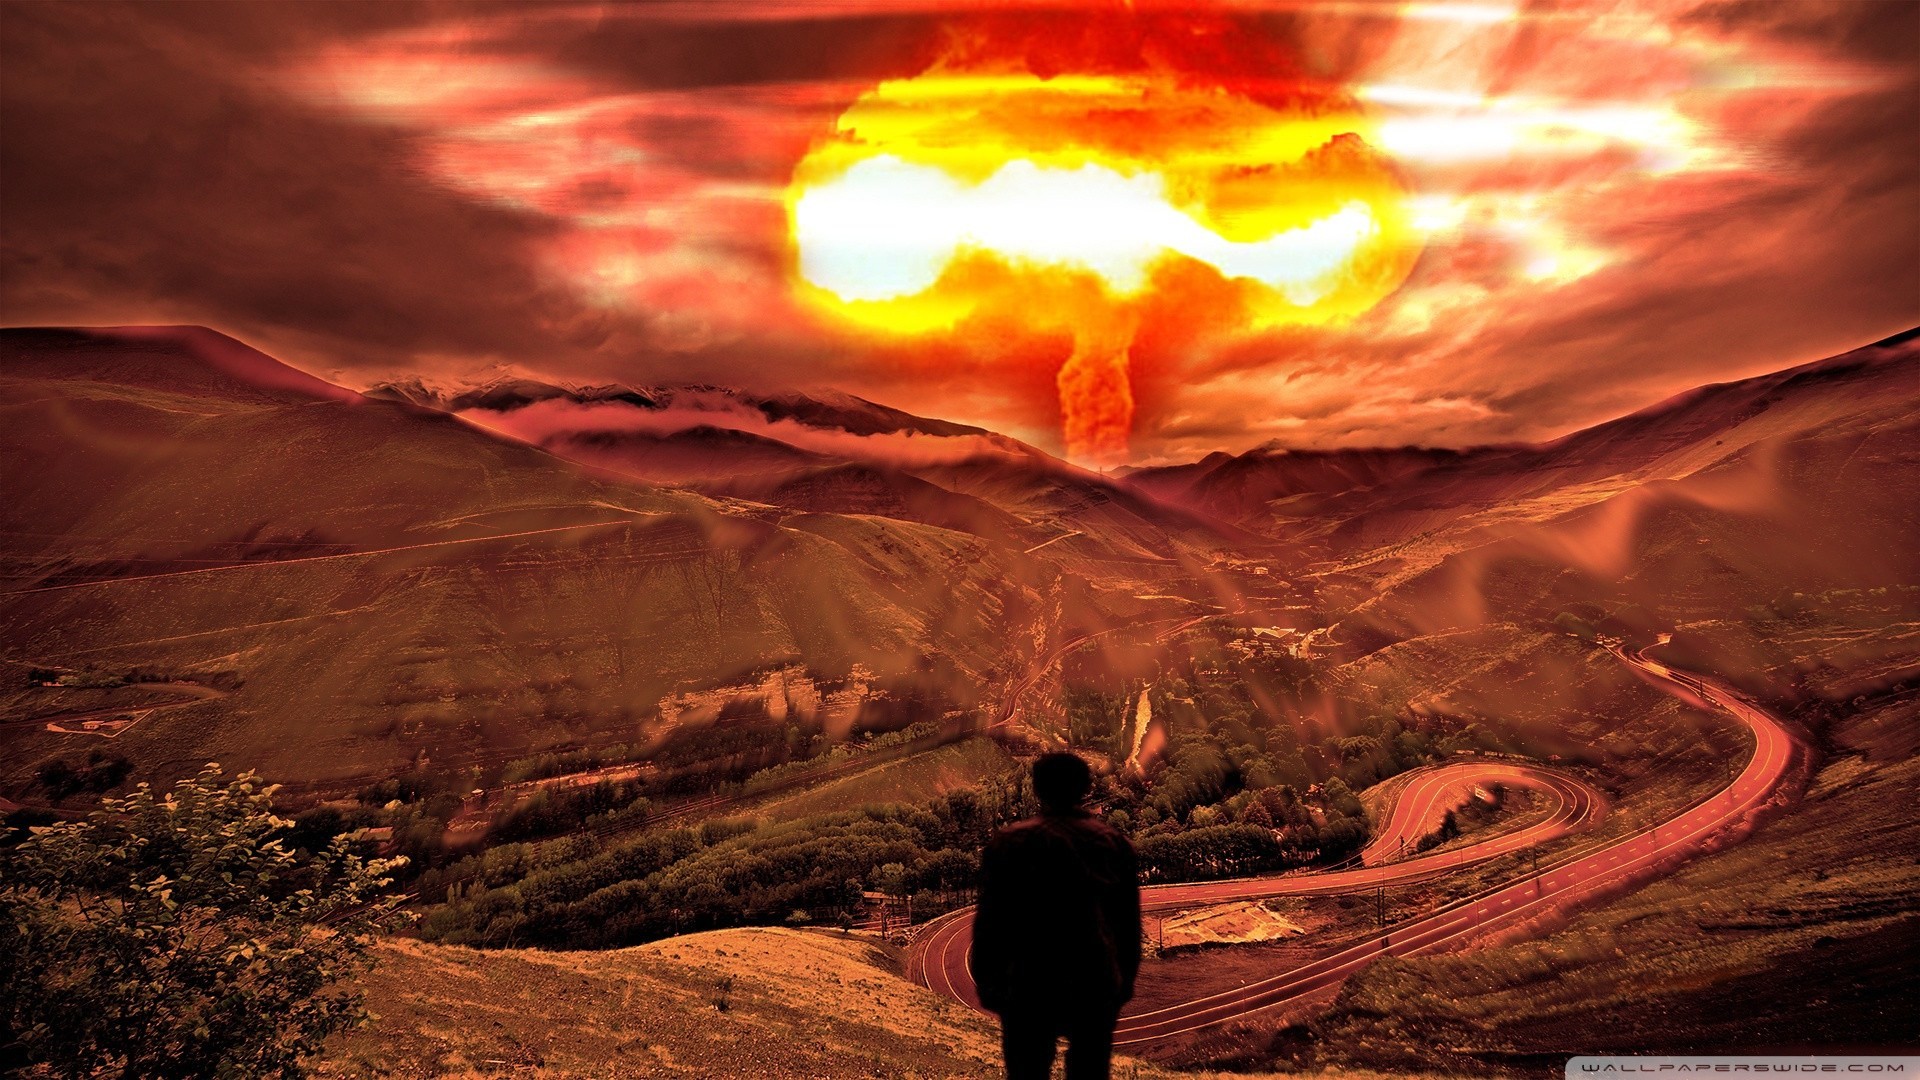 1920x1080 EBCu0ow-nuclear-explosion-wallpaper